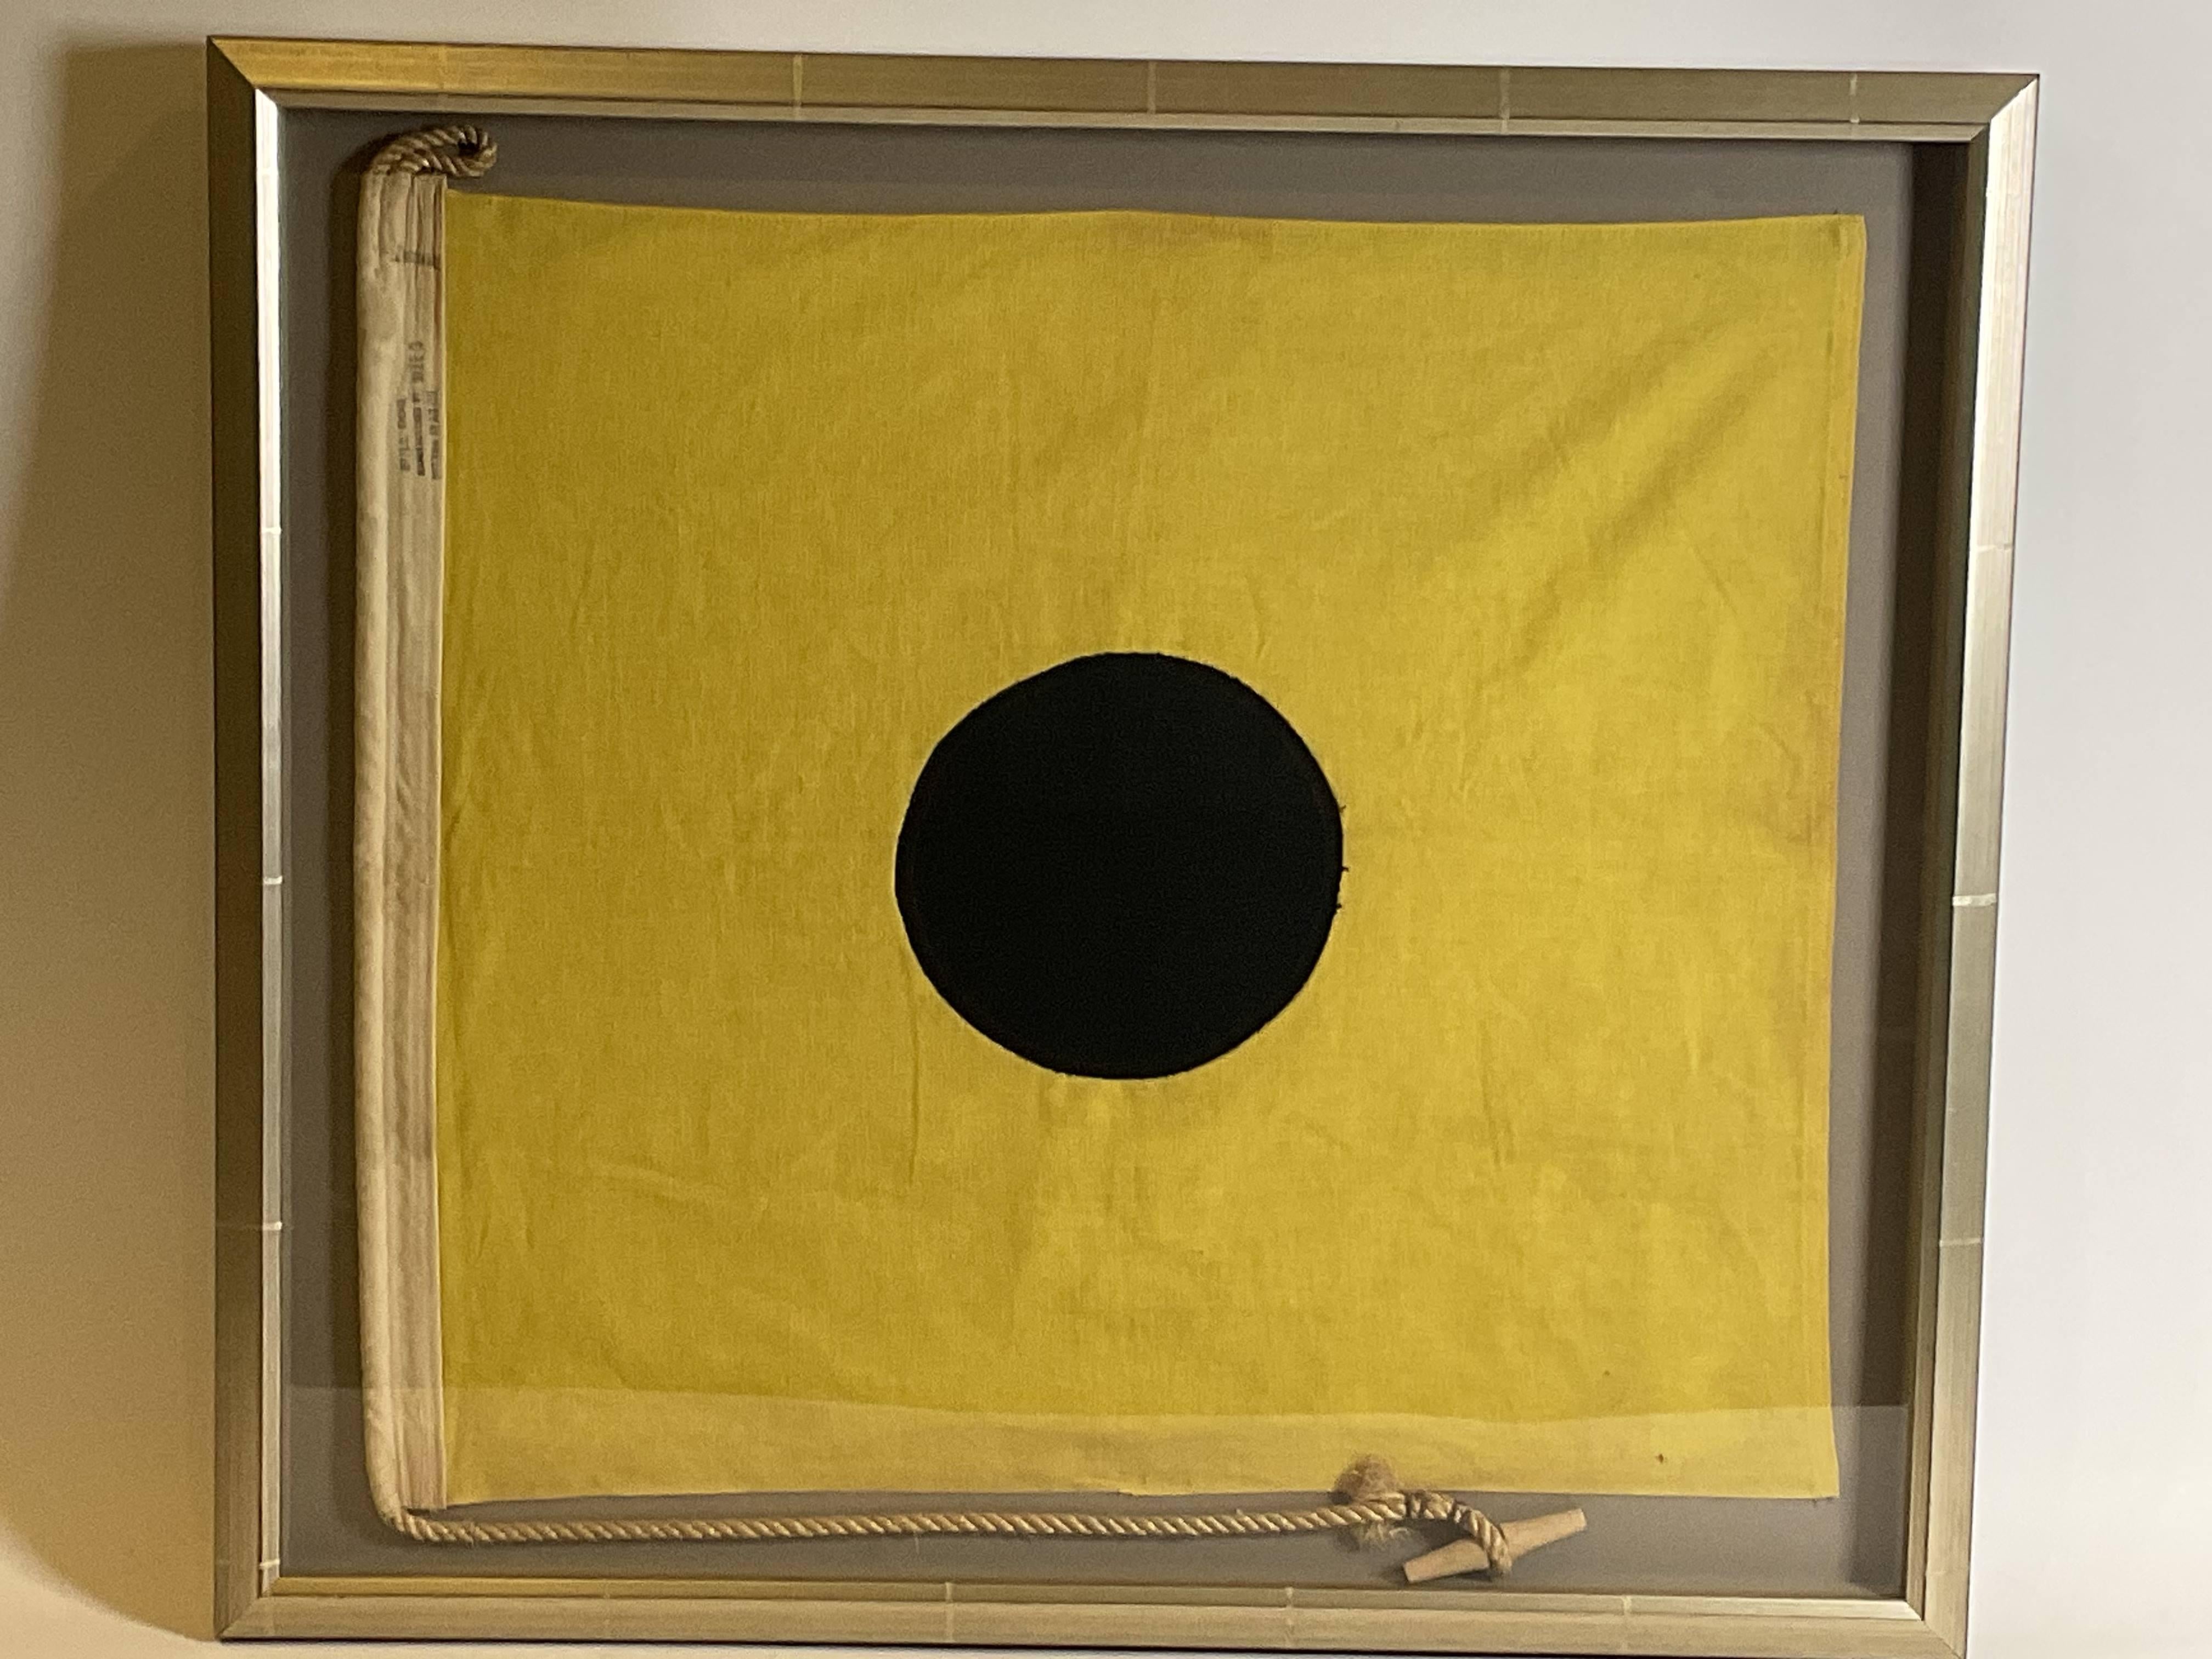 Early 20th Century Nautical Signal Flag Representing The Letter 